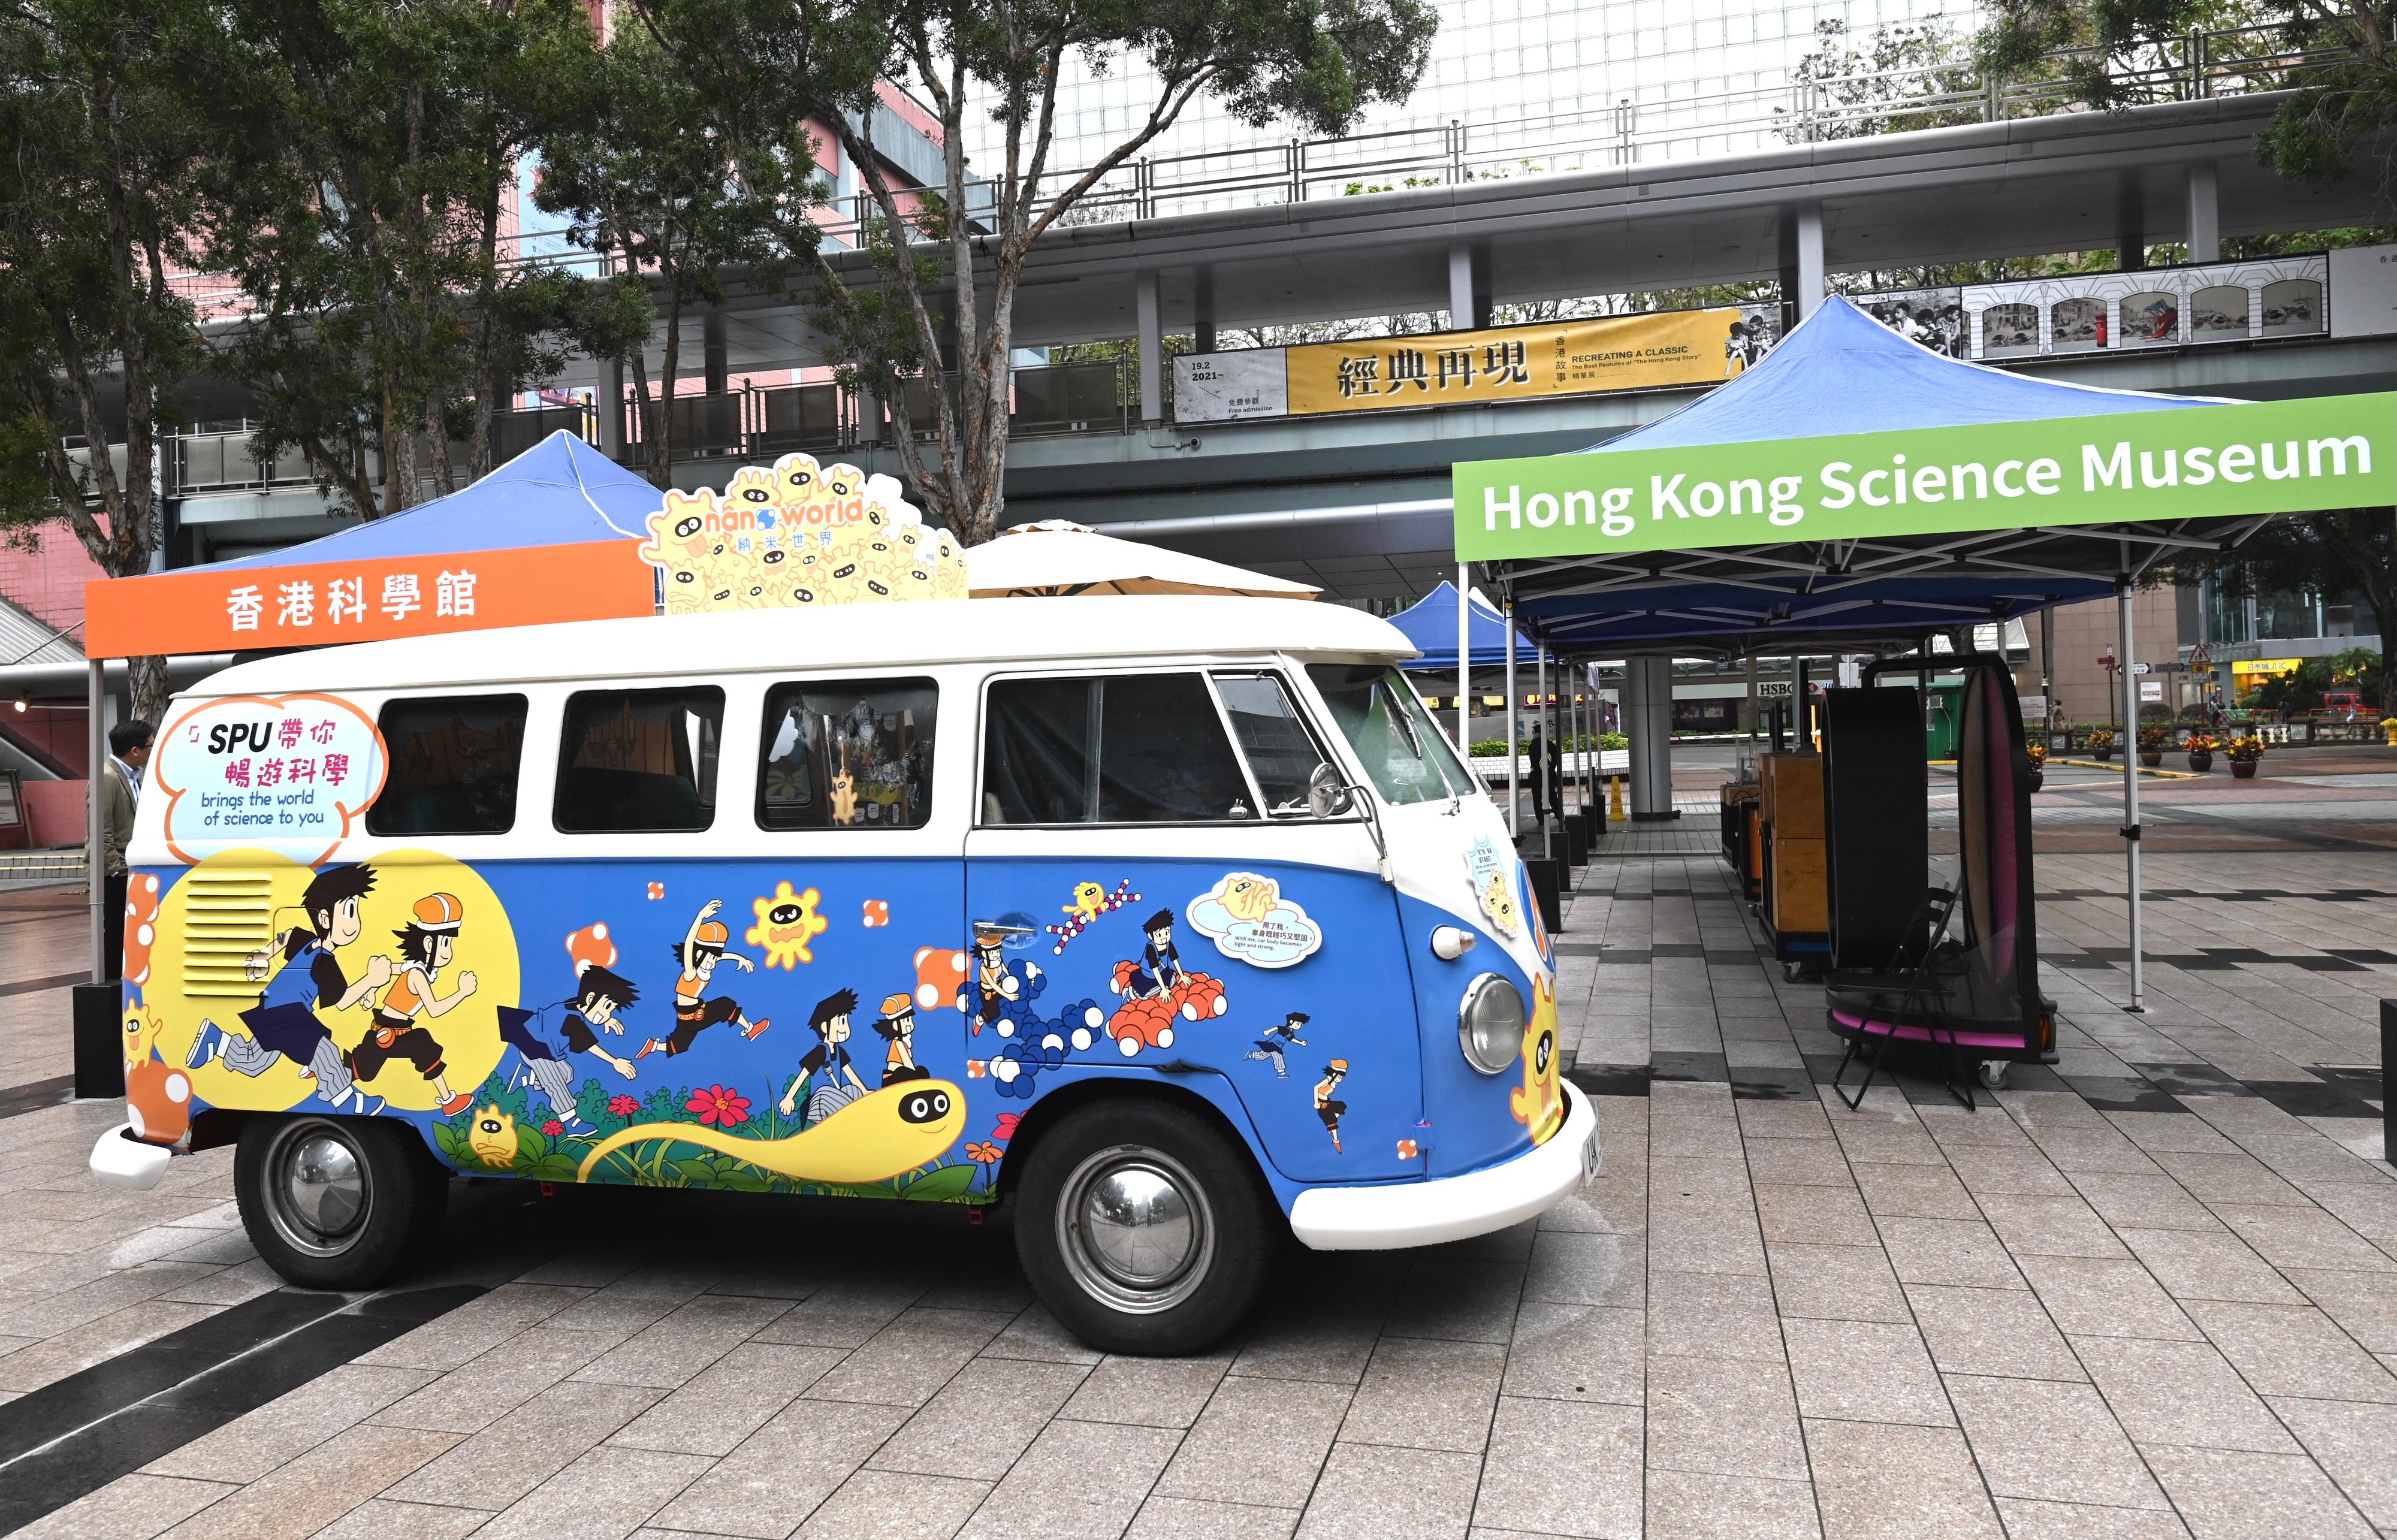 HK SciFest 2023, organised by the Science Promotion Unit of the Hong Kong Science Museum, will be held from today (March 31) to April 16 with the theme of "Science Around You". Members of the public can learn about applications of nanotechnology in our daily lives through the interactive exhibits of the outreach vehicle "Gear Up" of the Science Promotion Unit.